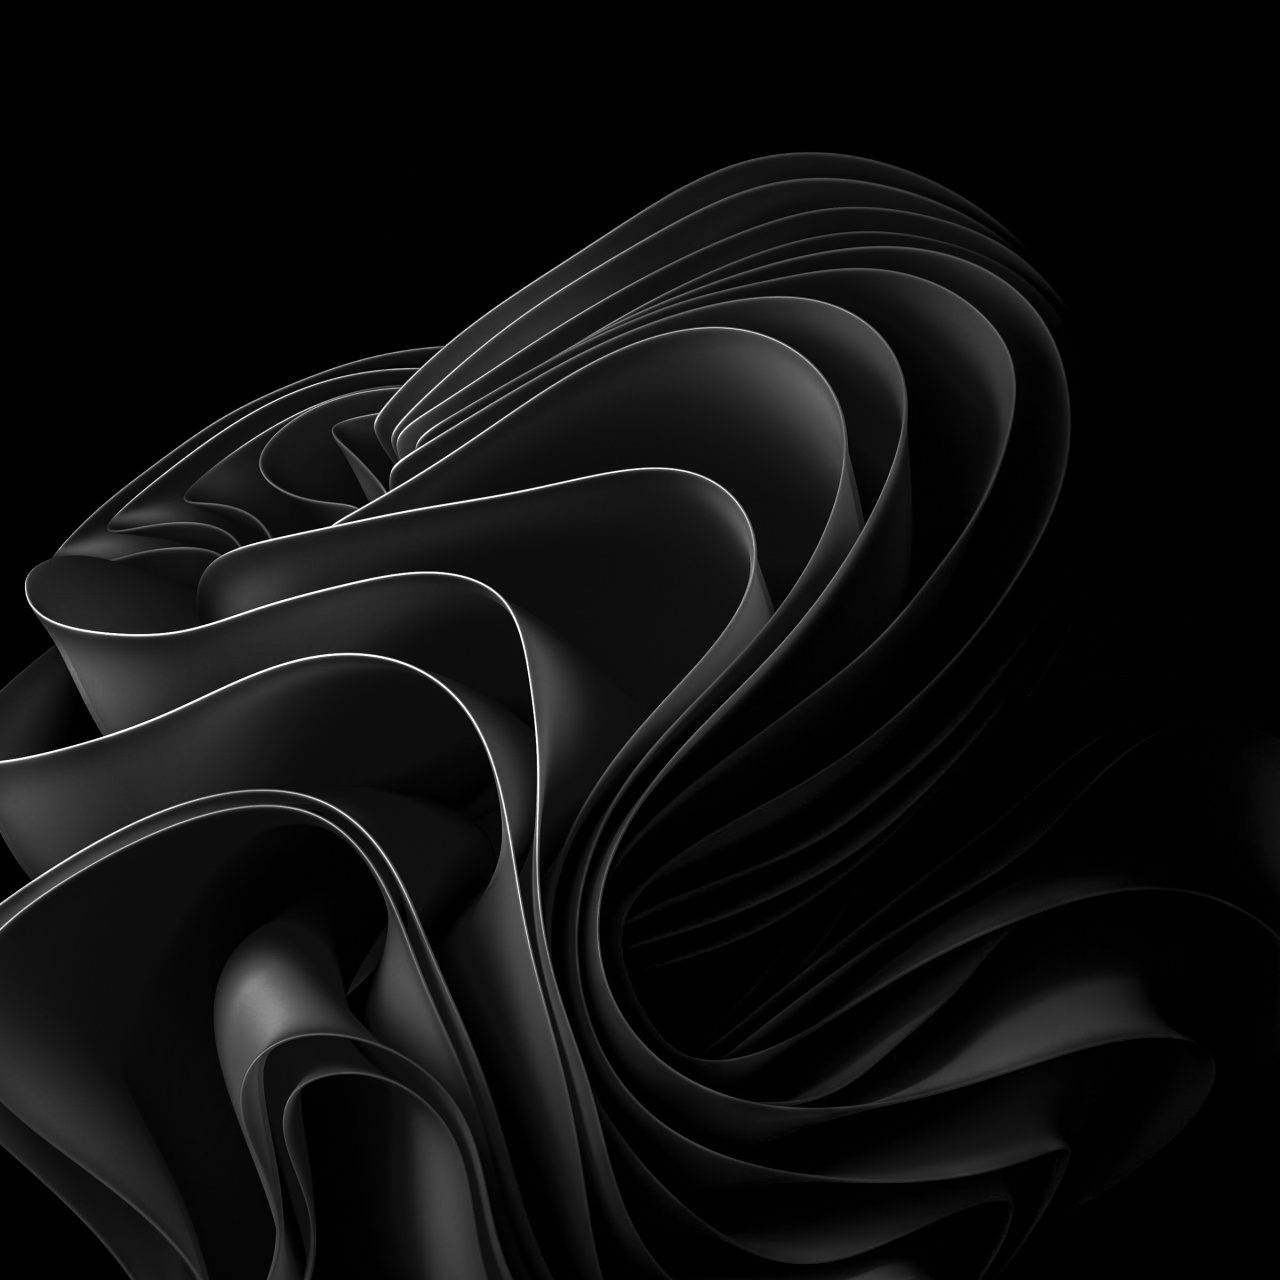 Download wallpapers black waves darkness abstract waves creative   Desktop wallpaper black Abstract waves Abstract